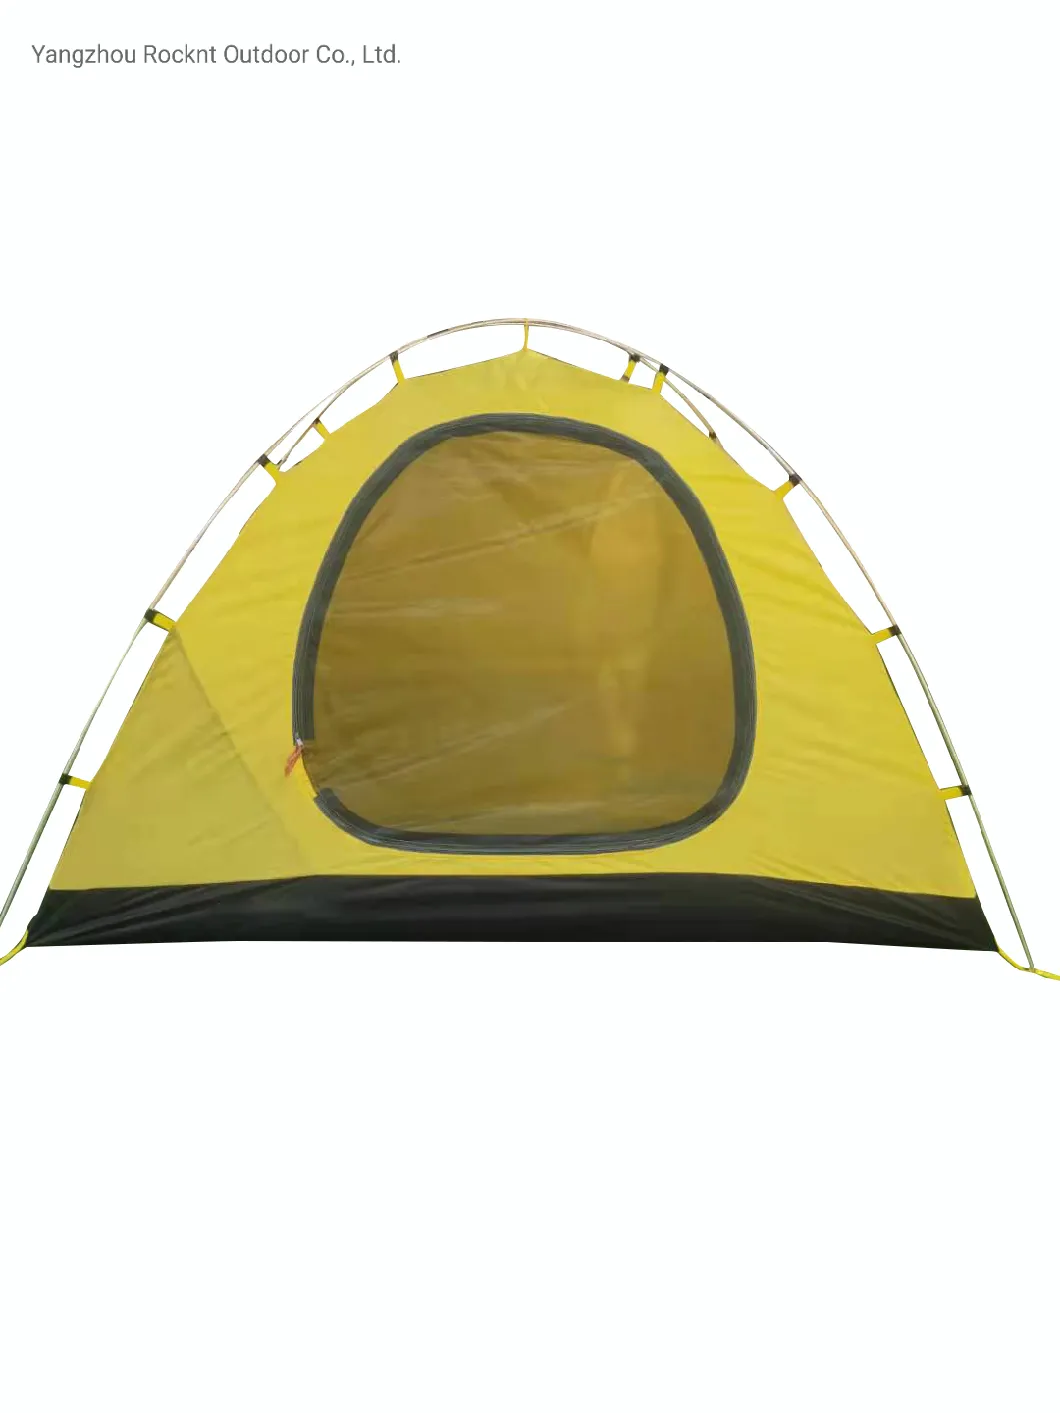 2 Persons Waterproof Double Layer Outdoor Camping Tent